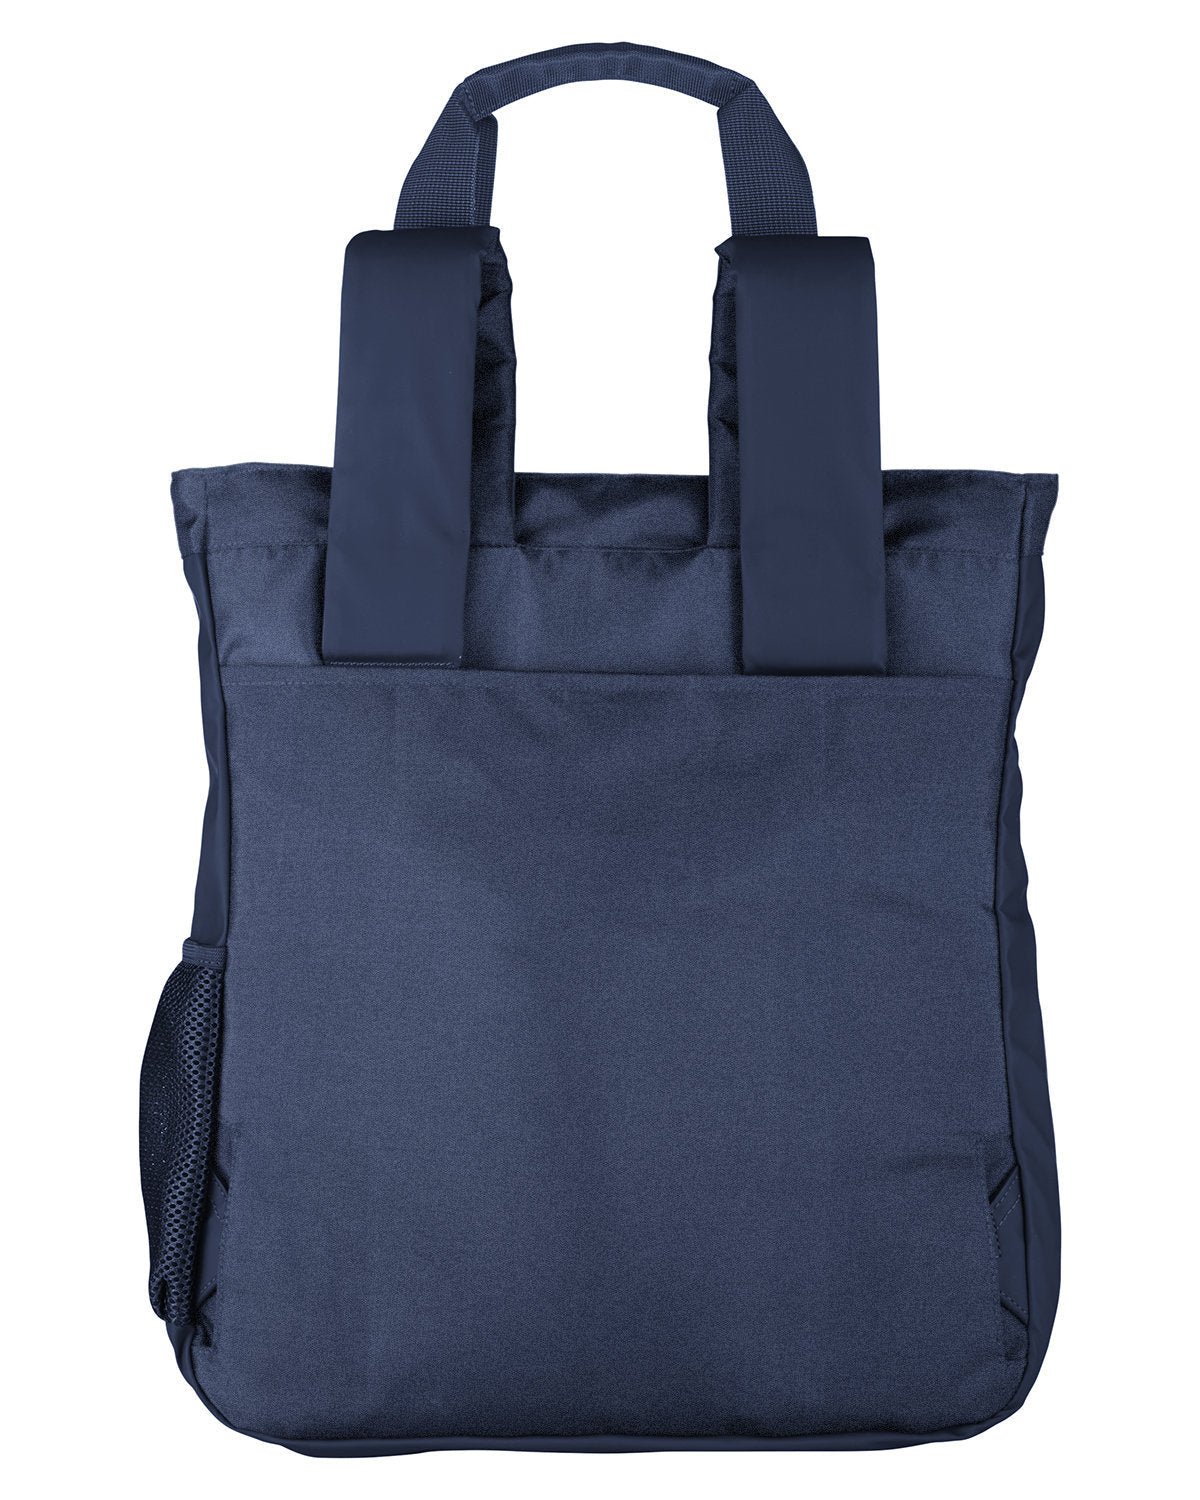 NE901-North End-CLASSIC NAVY-North End-Bags and Accessories-2